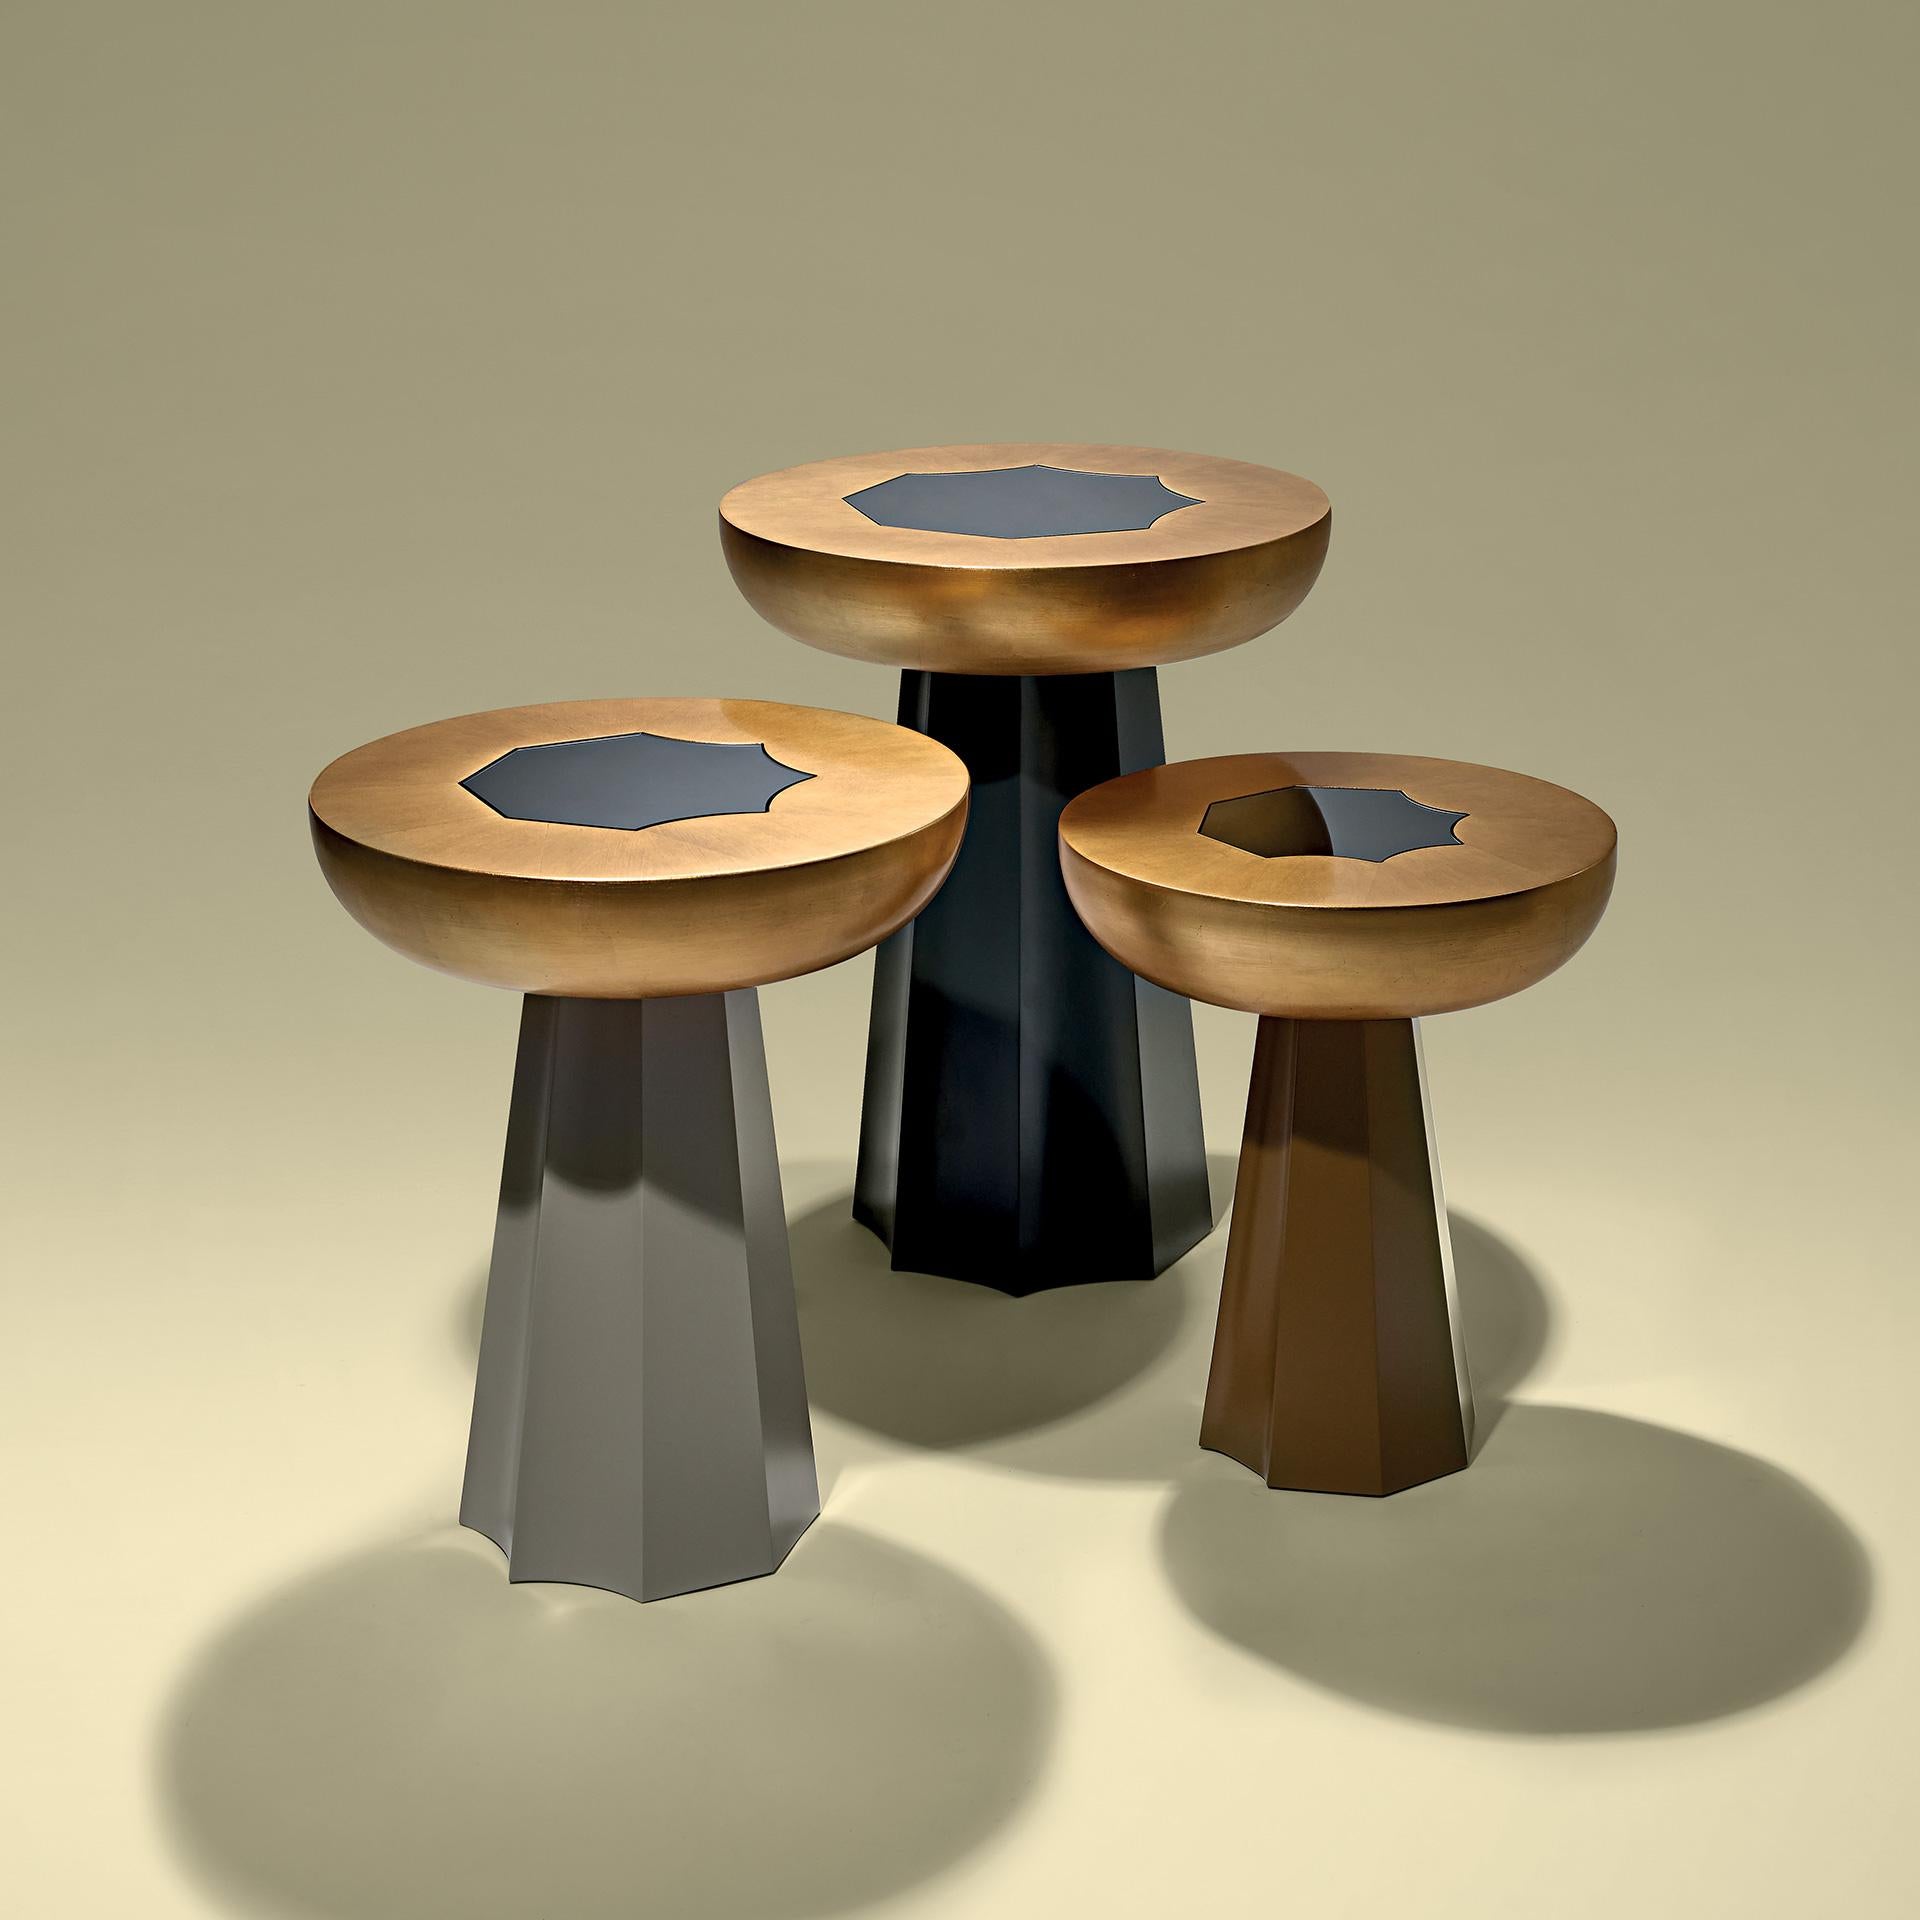 Gold table set in gold leaf and grey mirror and base in lacquer matt 
     
The other tables dimensions:
Ø 18 x H 20 in
Ø 16 x H 18 in.

Bespoke / Customizable
Identical shapes with different sizes and finishings.
All RAL colors available. (Mate /